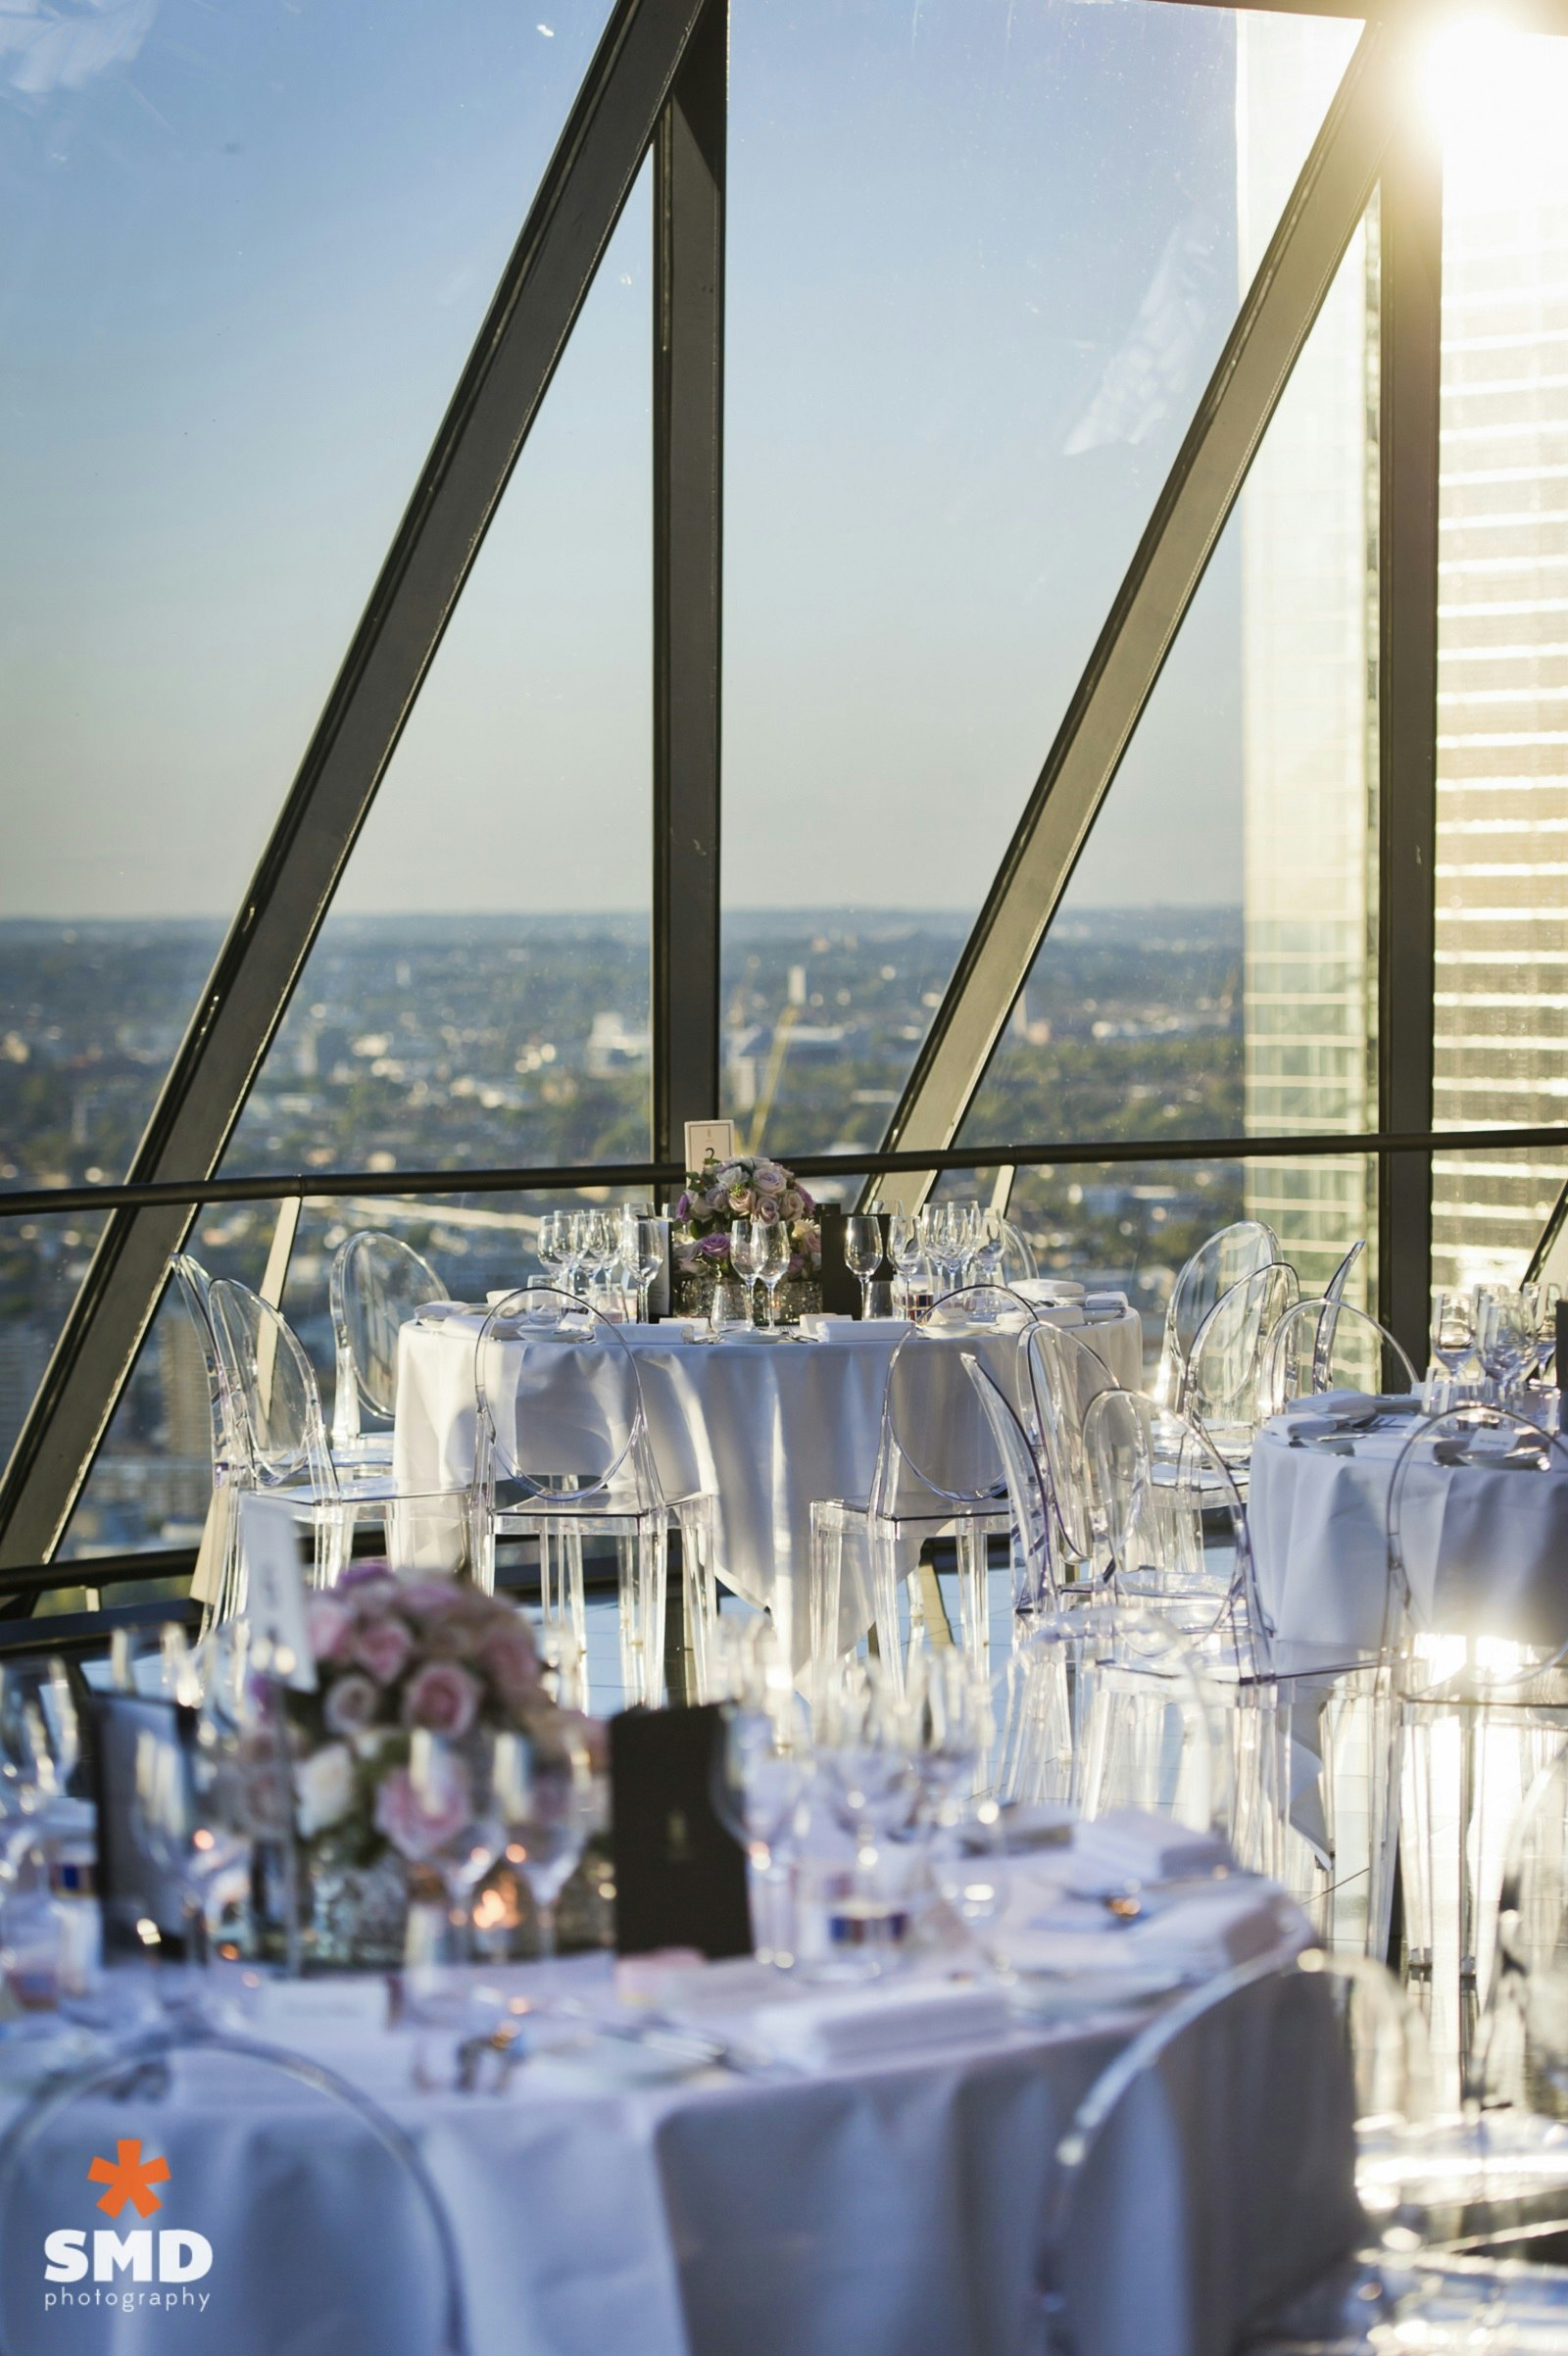 Searcys at the Gherkin - Exclusive hire of Helix and Iris image 9